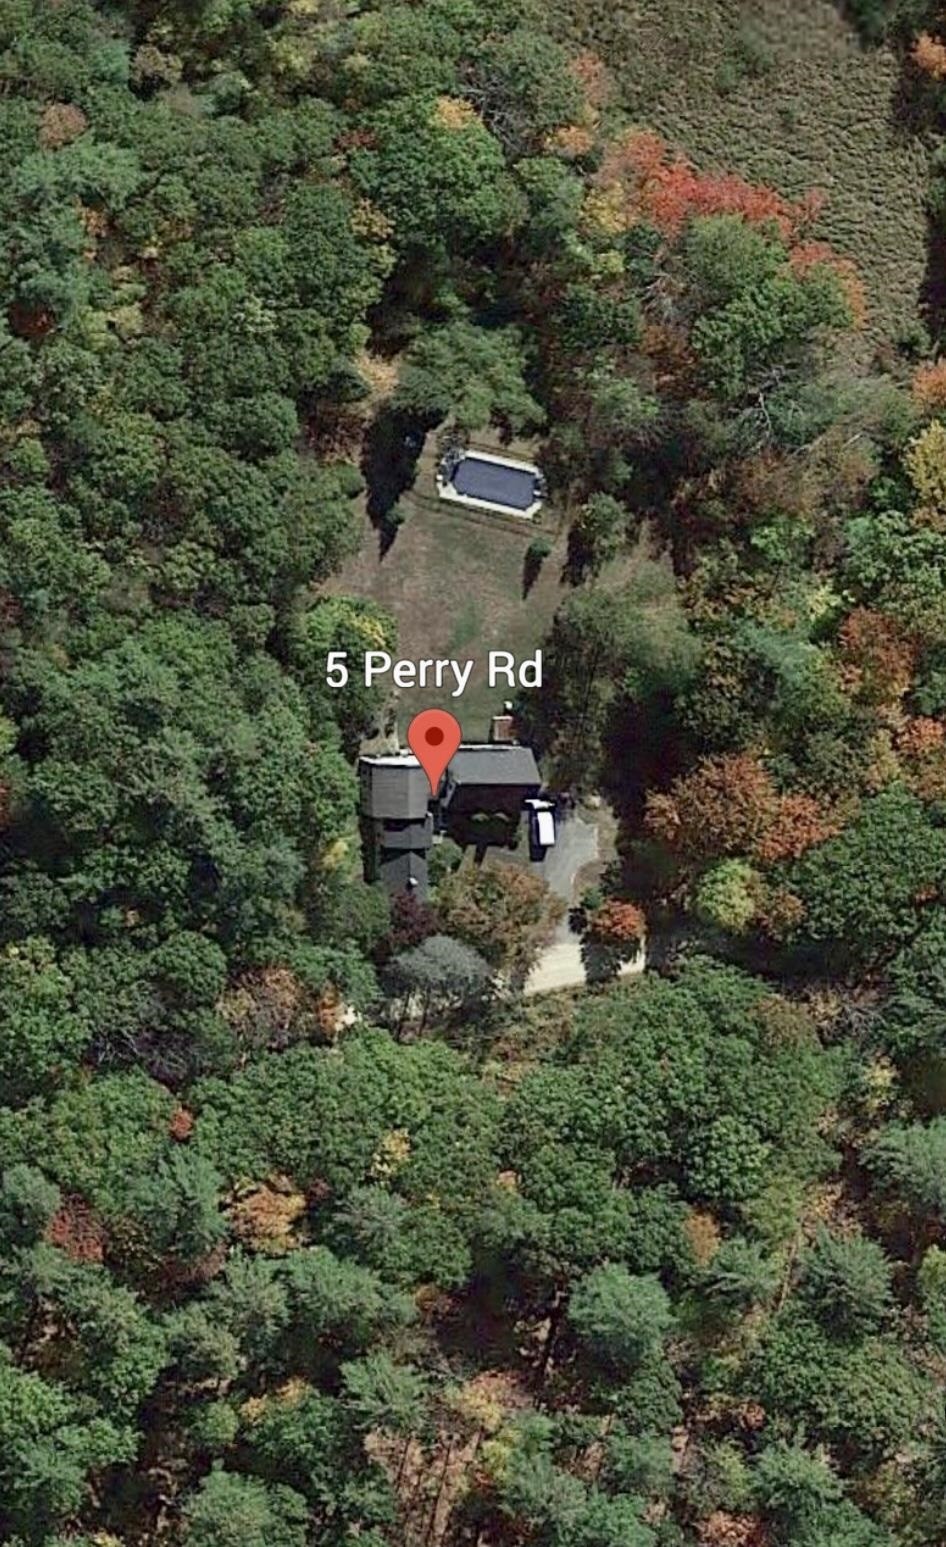 2. 5 Perry Road